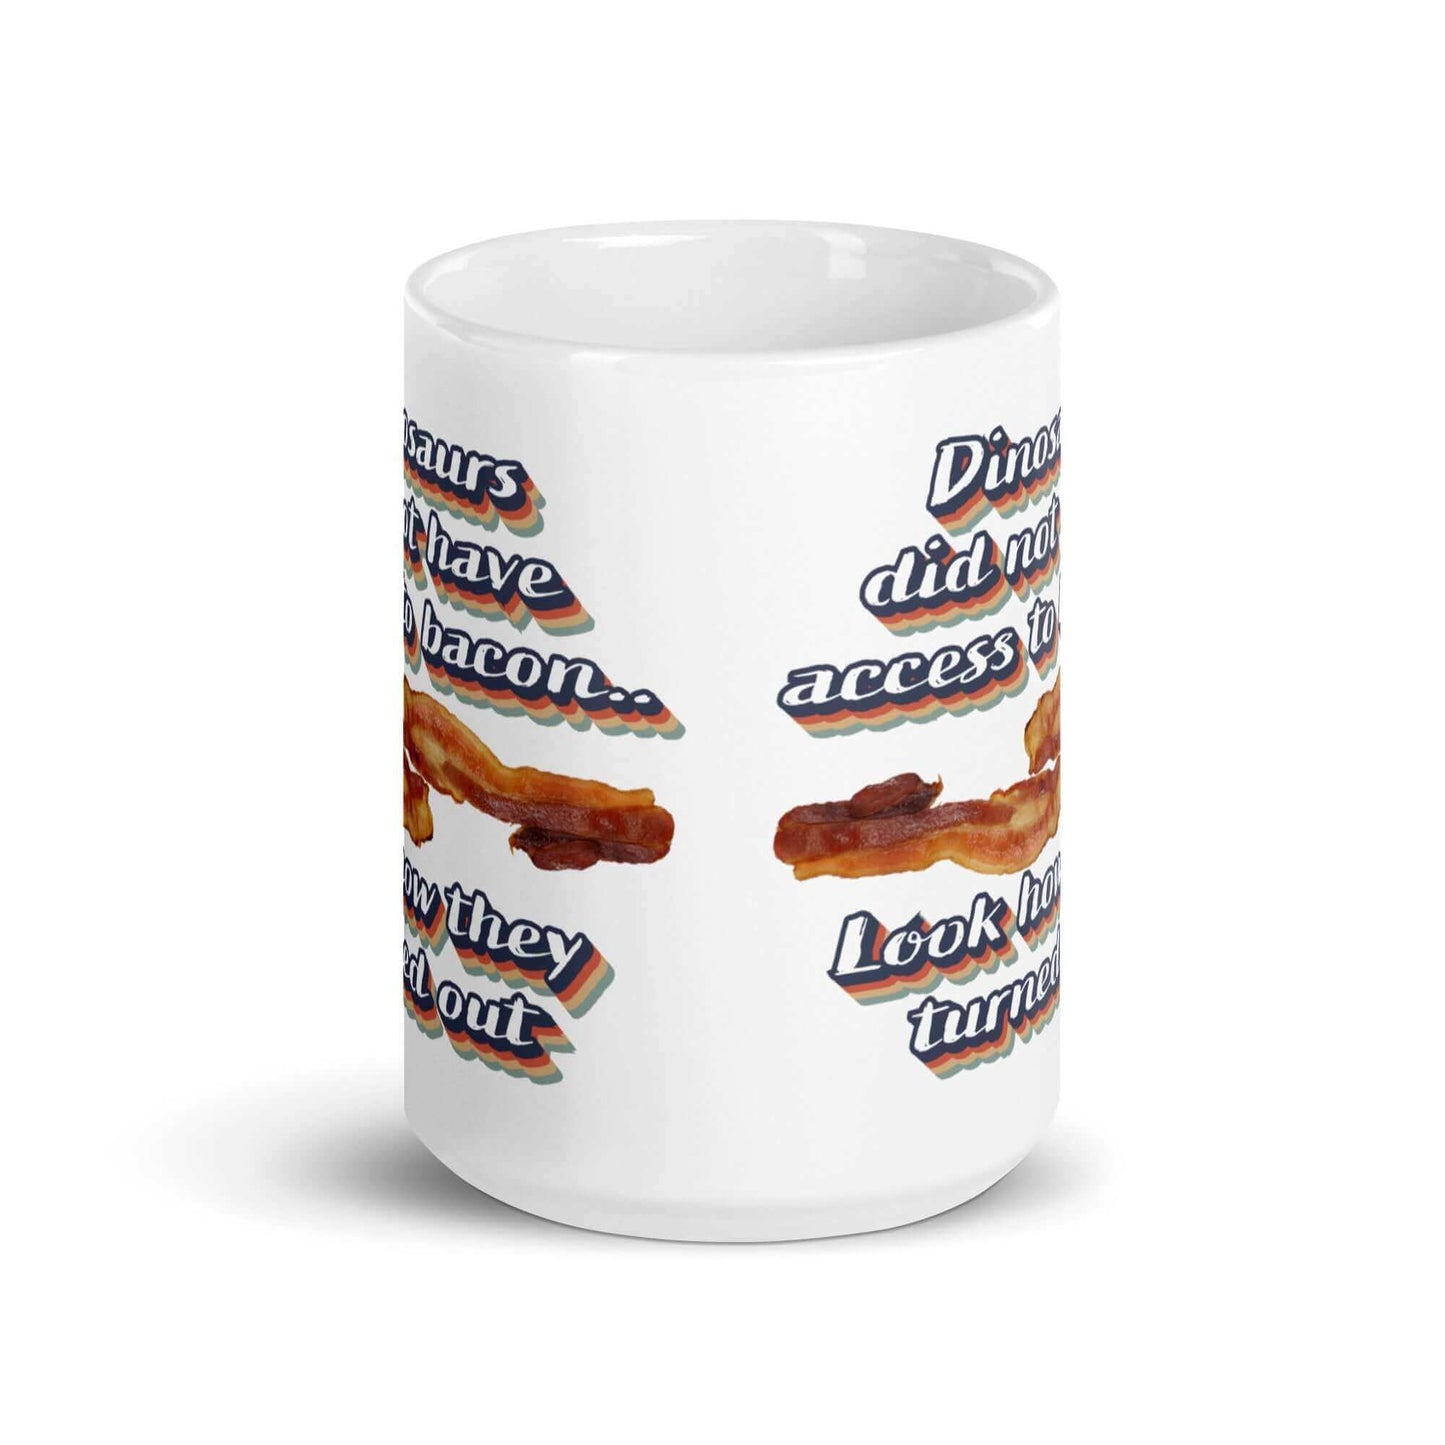 Dinosaurs did not have access to bacon.. Look how they turned out - White glossy mug - Horrible Designs